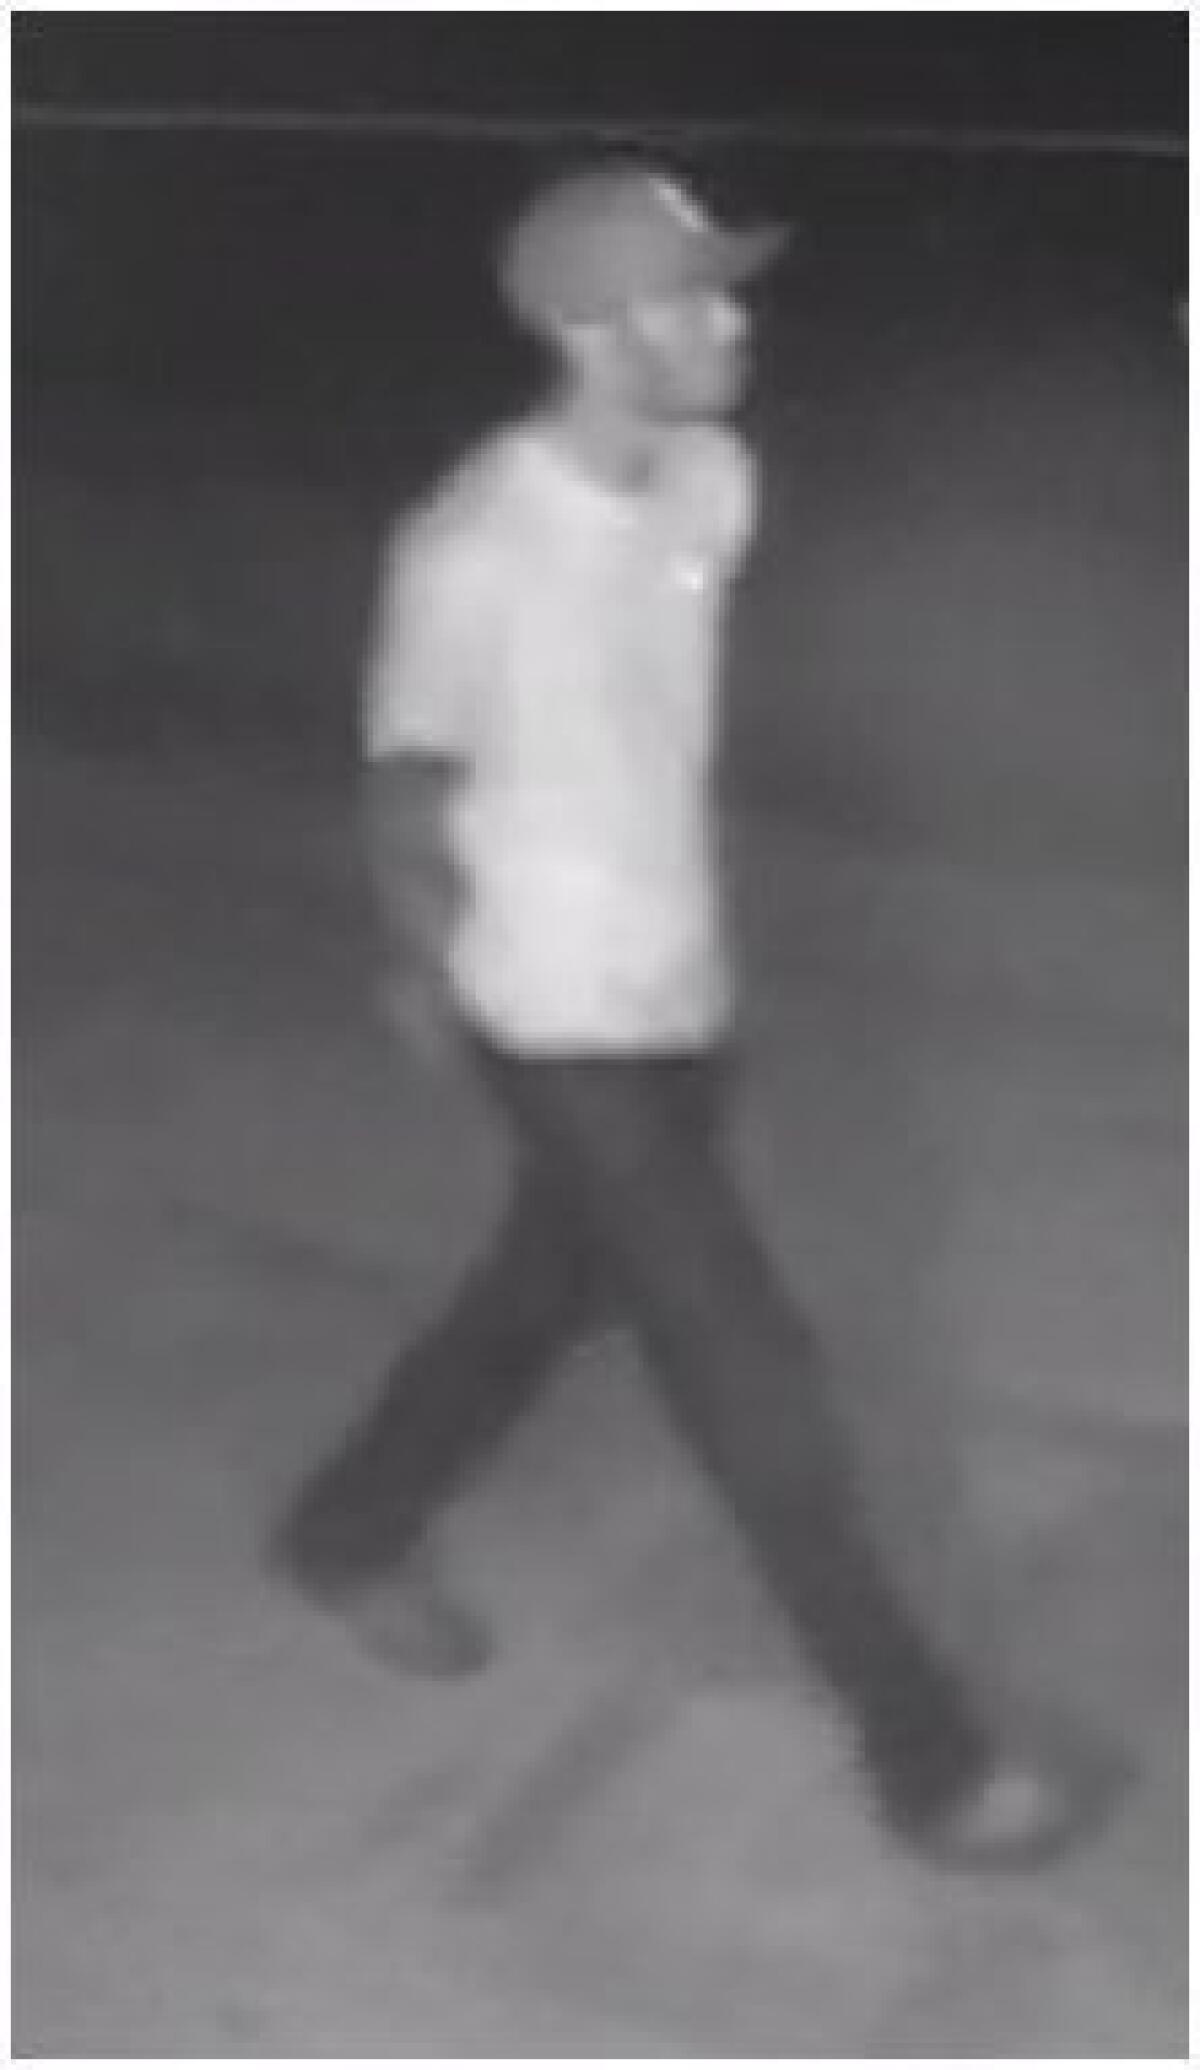 Police released this image of a "person of interest" in the area at the time of the Aug. 28 assault.